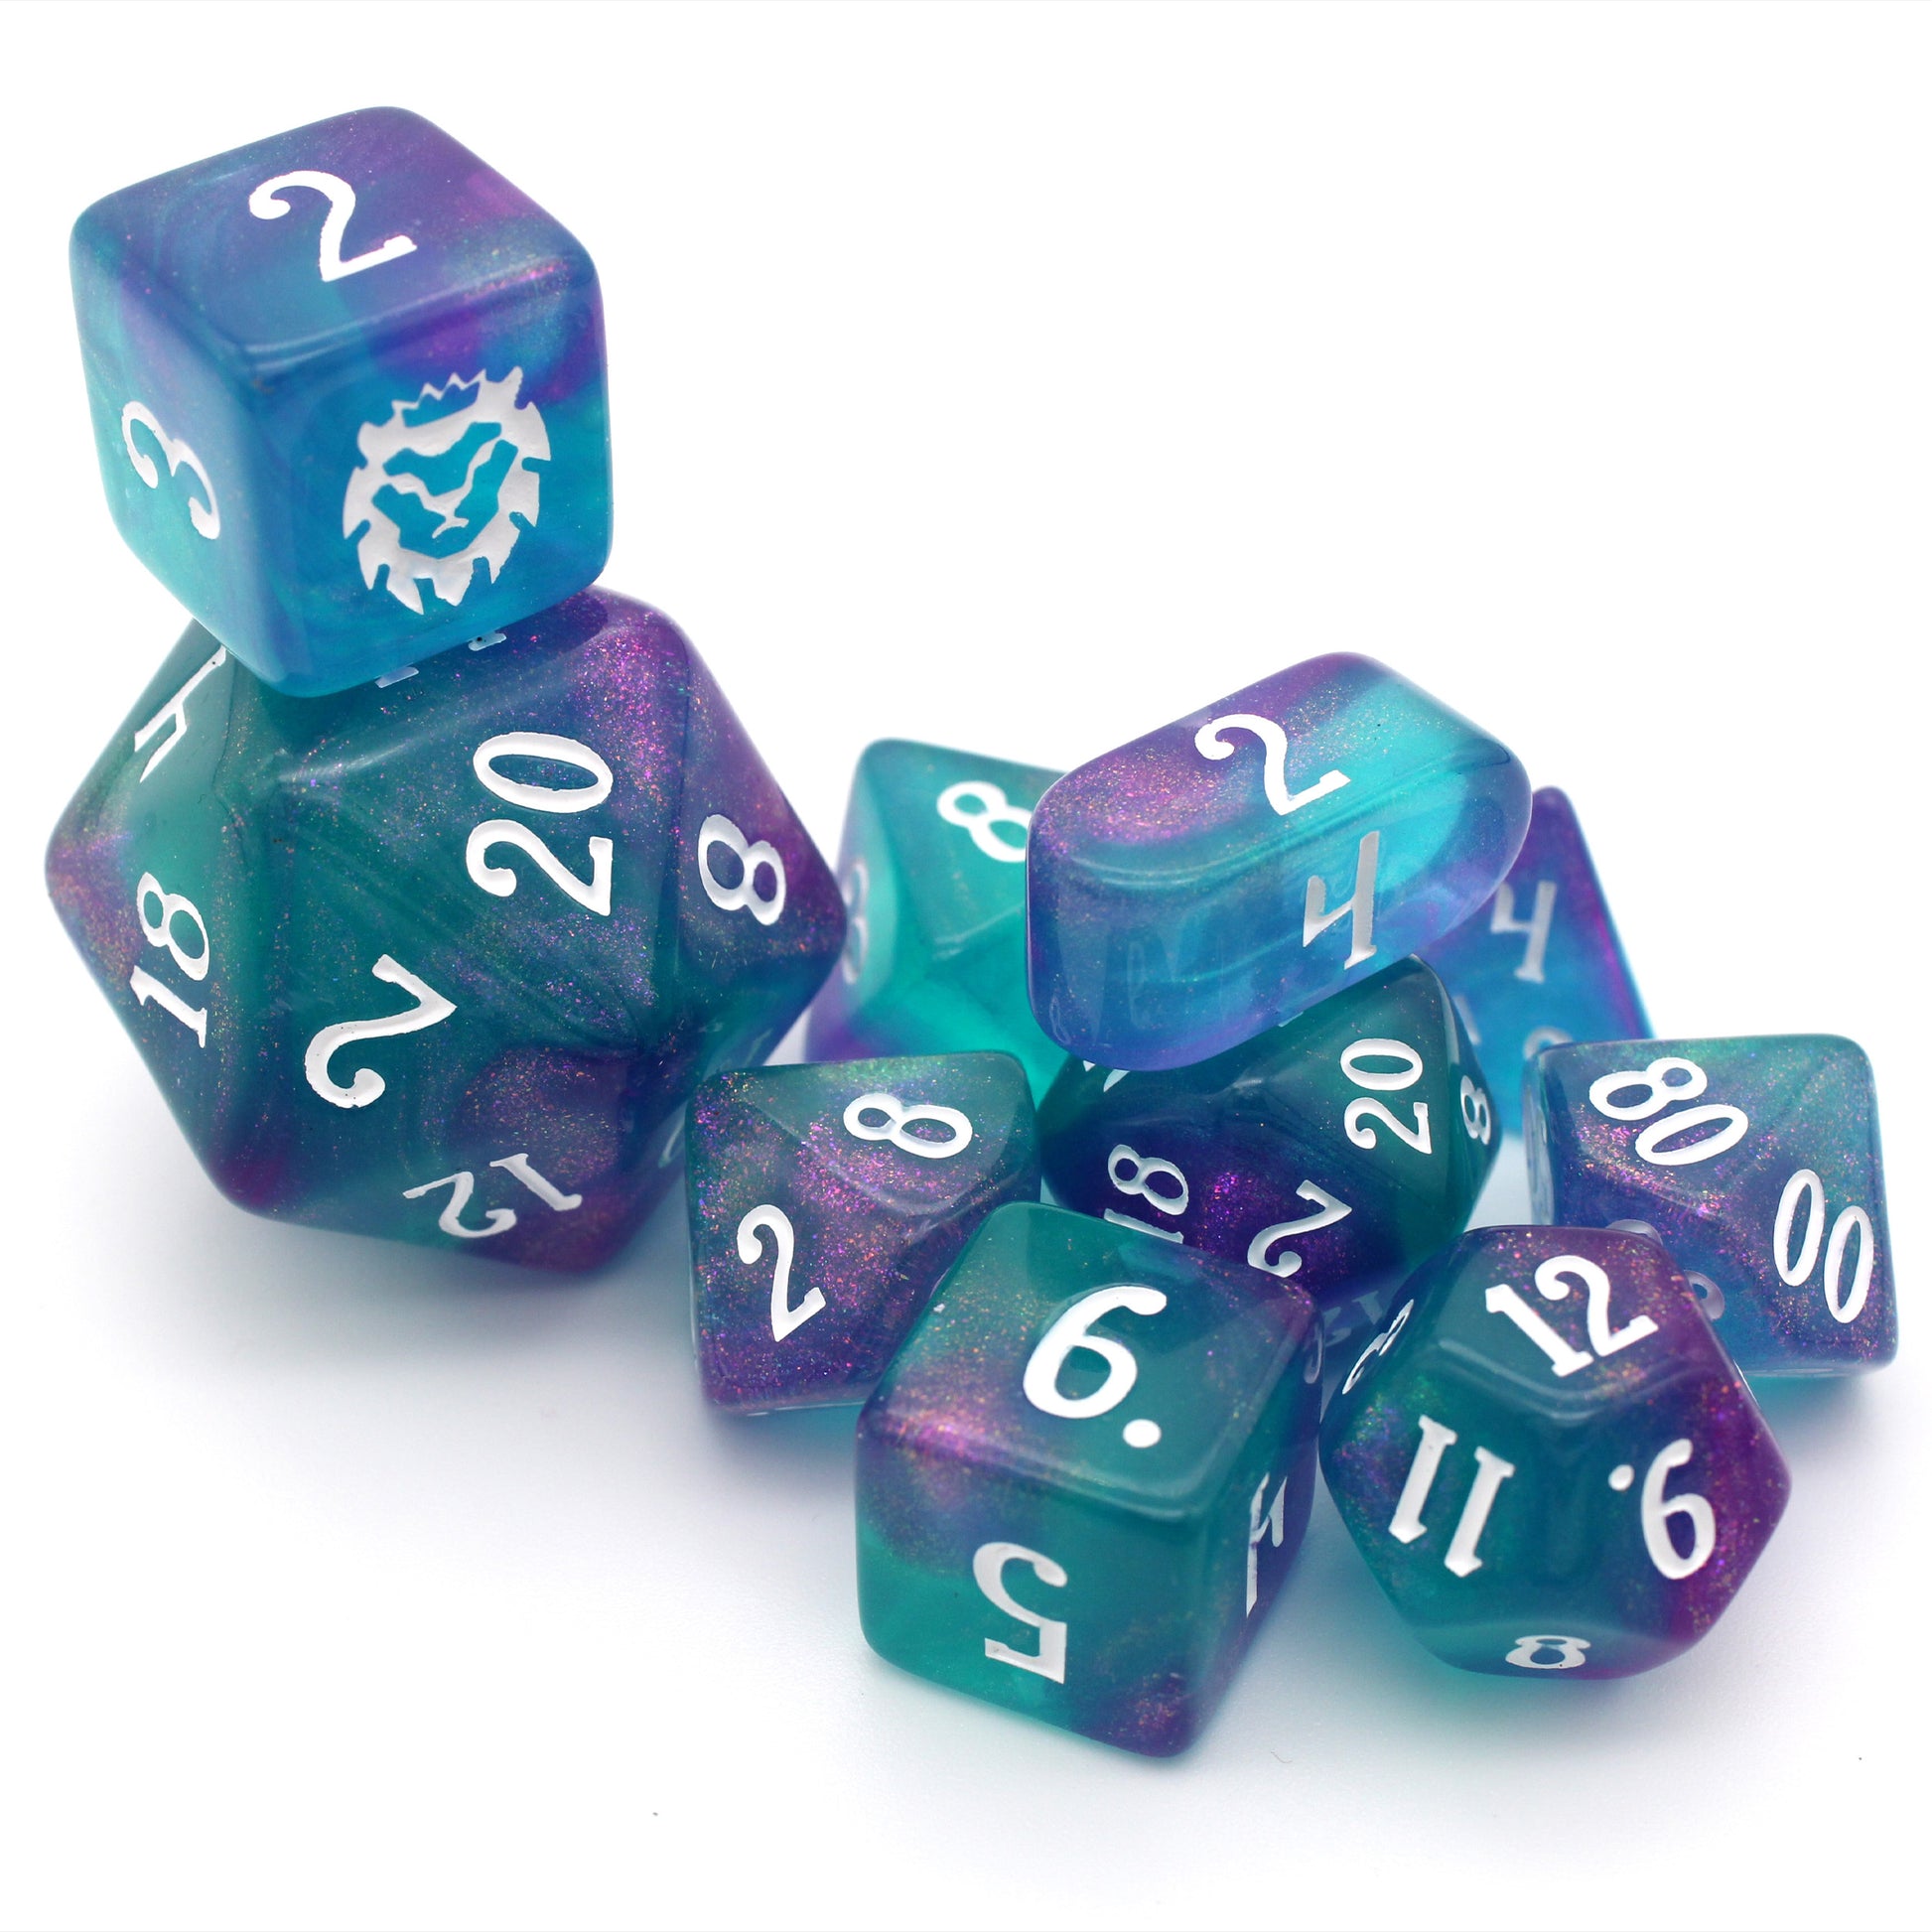 A 10 piece set of ocean teal resin dice with a splash of shimmering magenta and white ink.